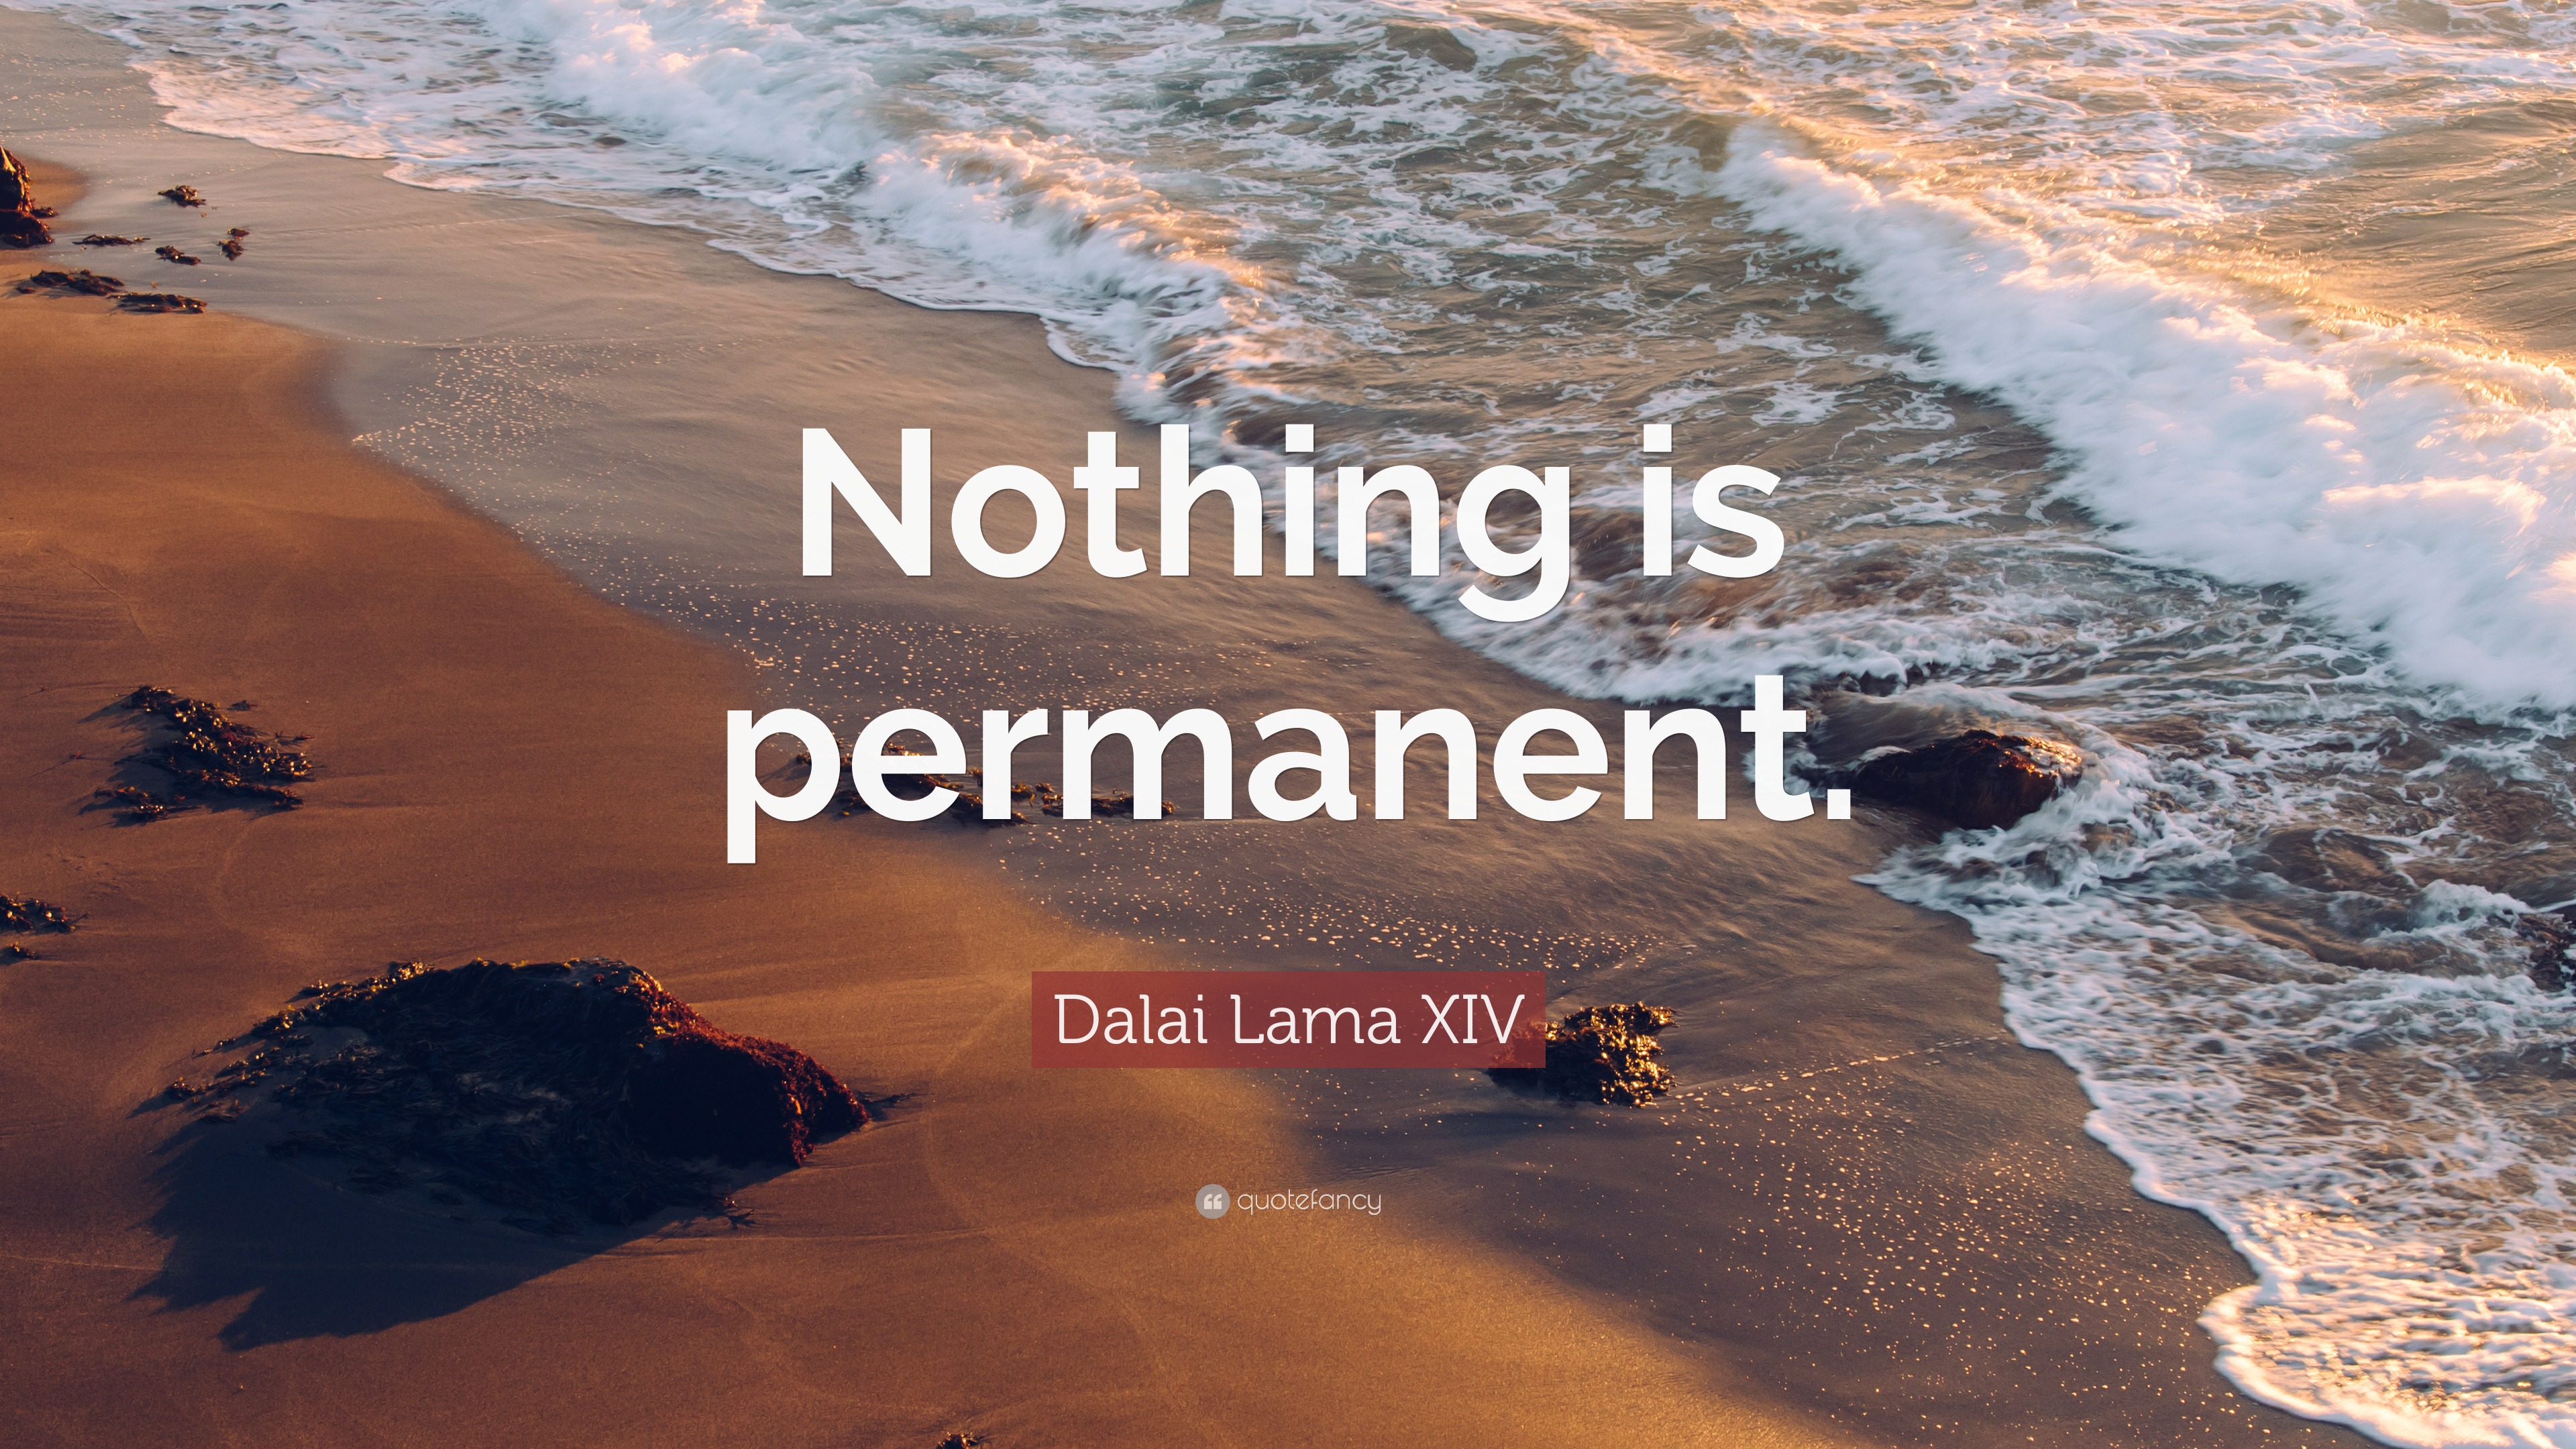 Top Nothing Is Permanent Quotes in the world The ultimate guide ...